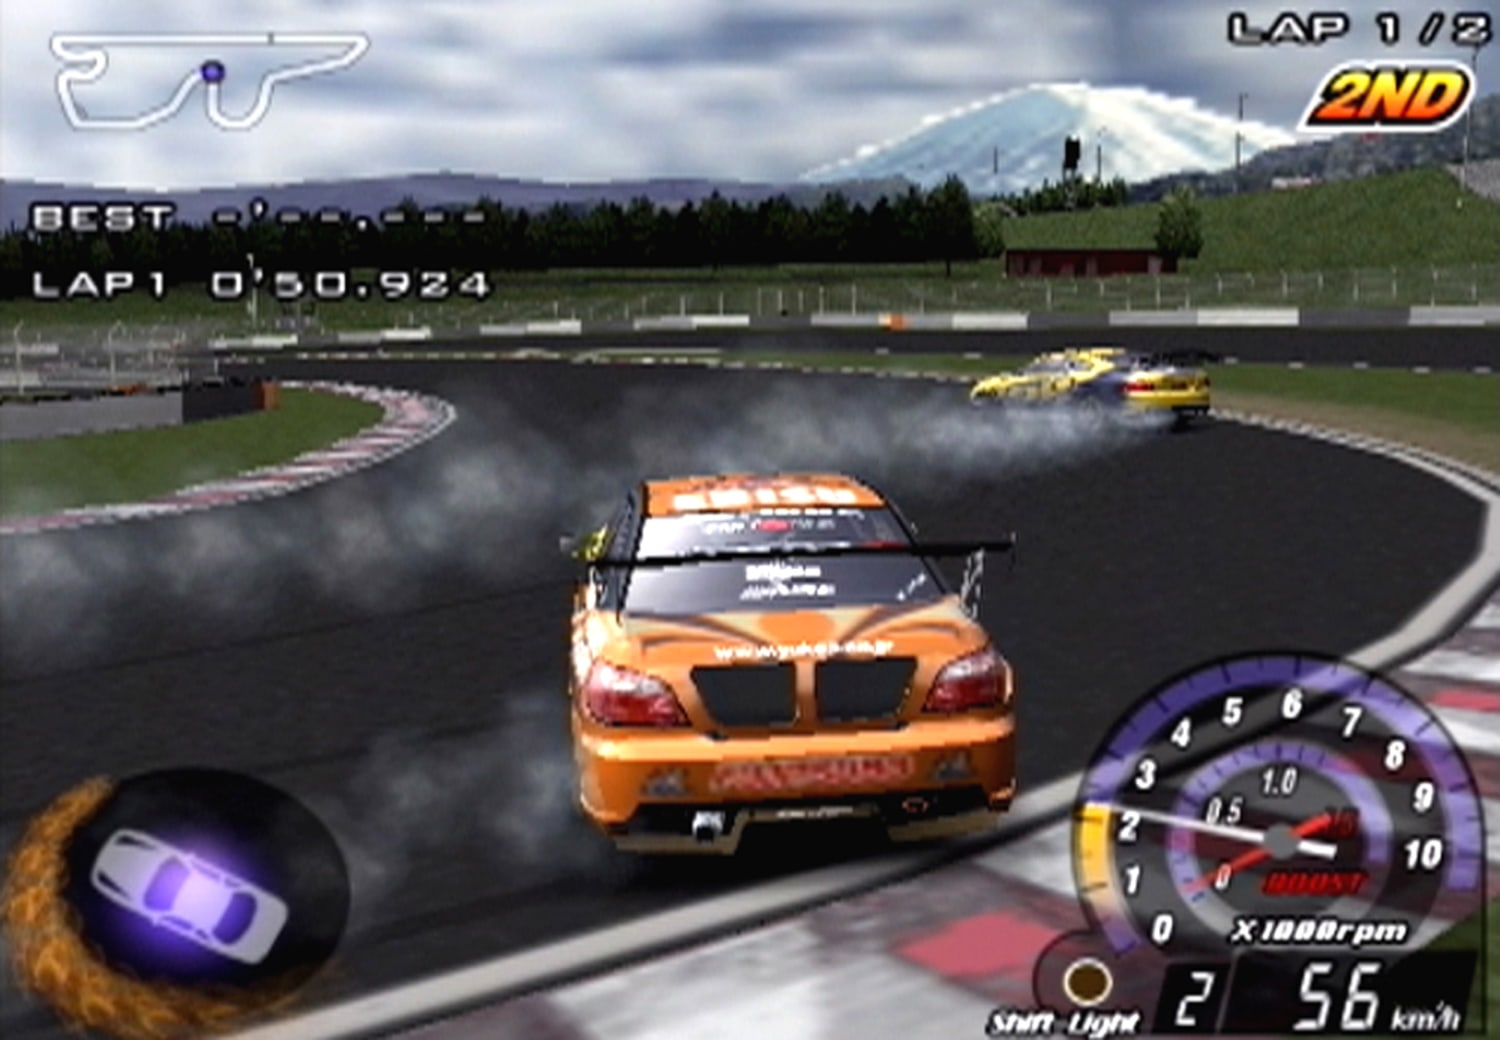 Extreme Drift Car Simulator  Play the Game for Free on PG